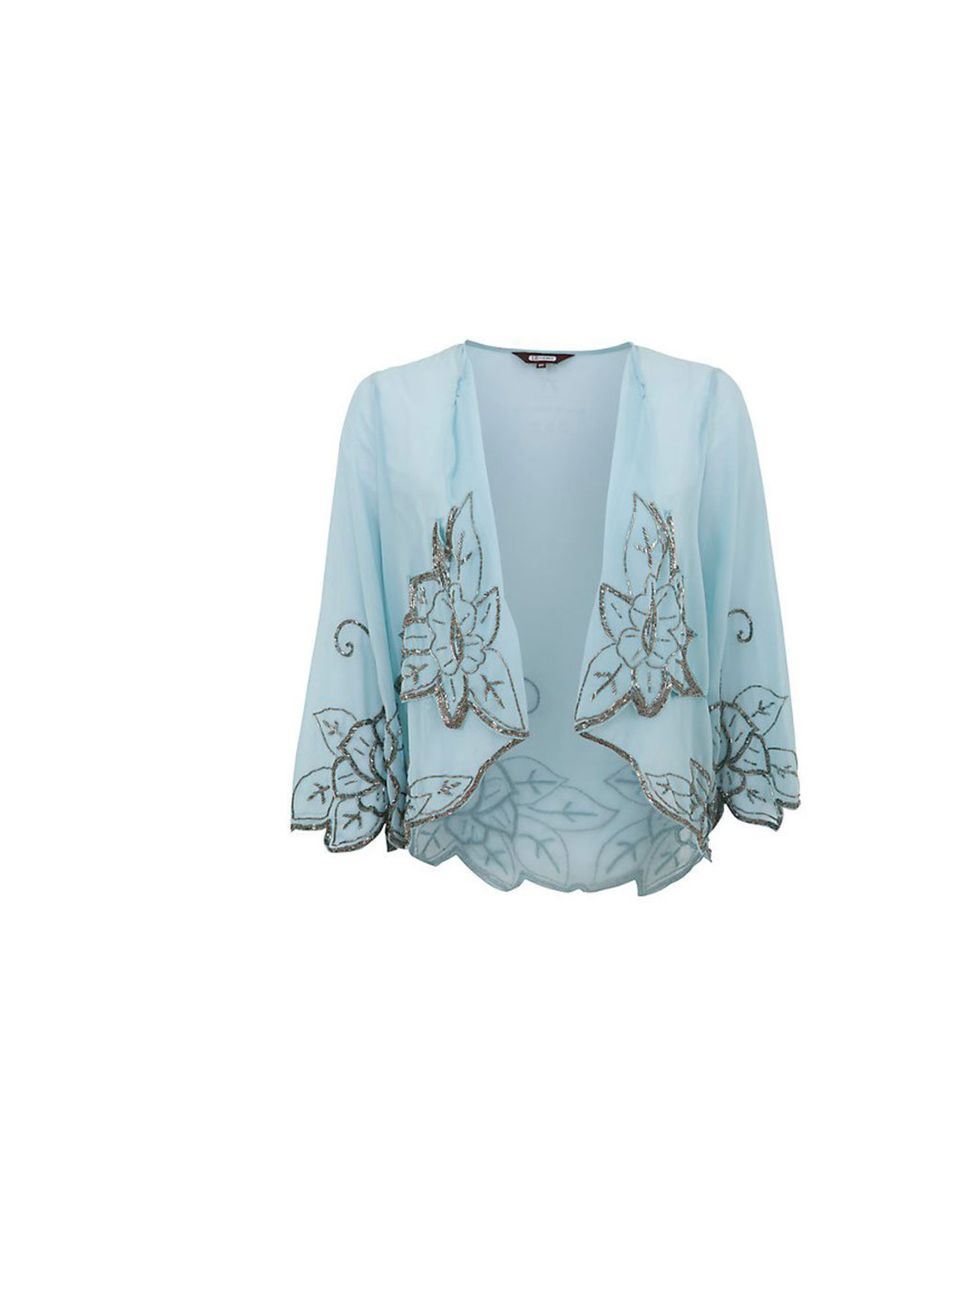 <p>18 and East embellished chiffon jacket, £39.99, at <a href="http://www.newlook.com/shop/womens/jackets-and-coats/18-and-east-pale-blue-embellished-leaf-chiffon-jacket-_284053345">New Look </a></p>